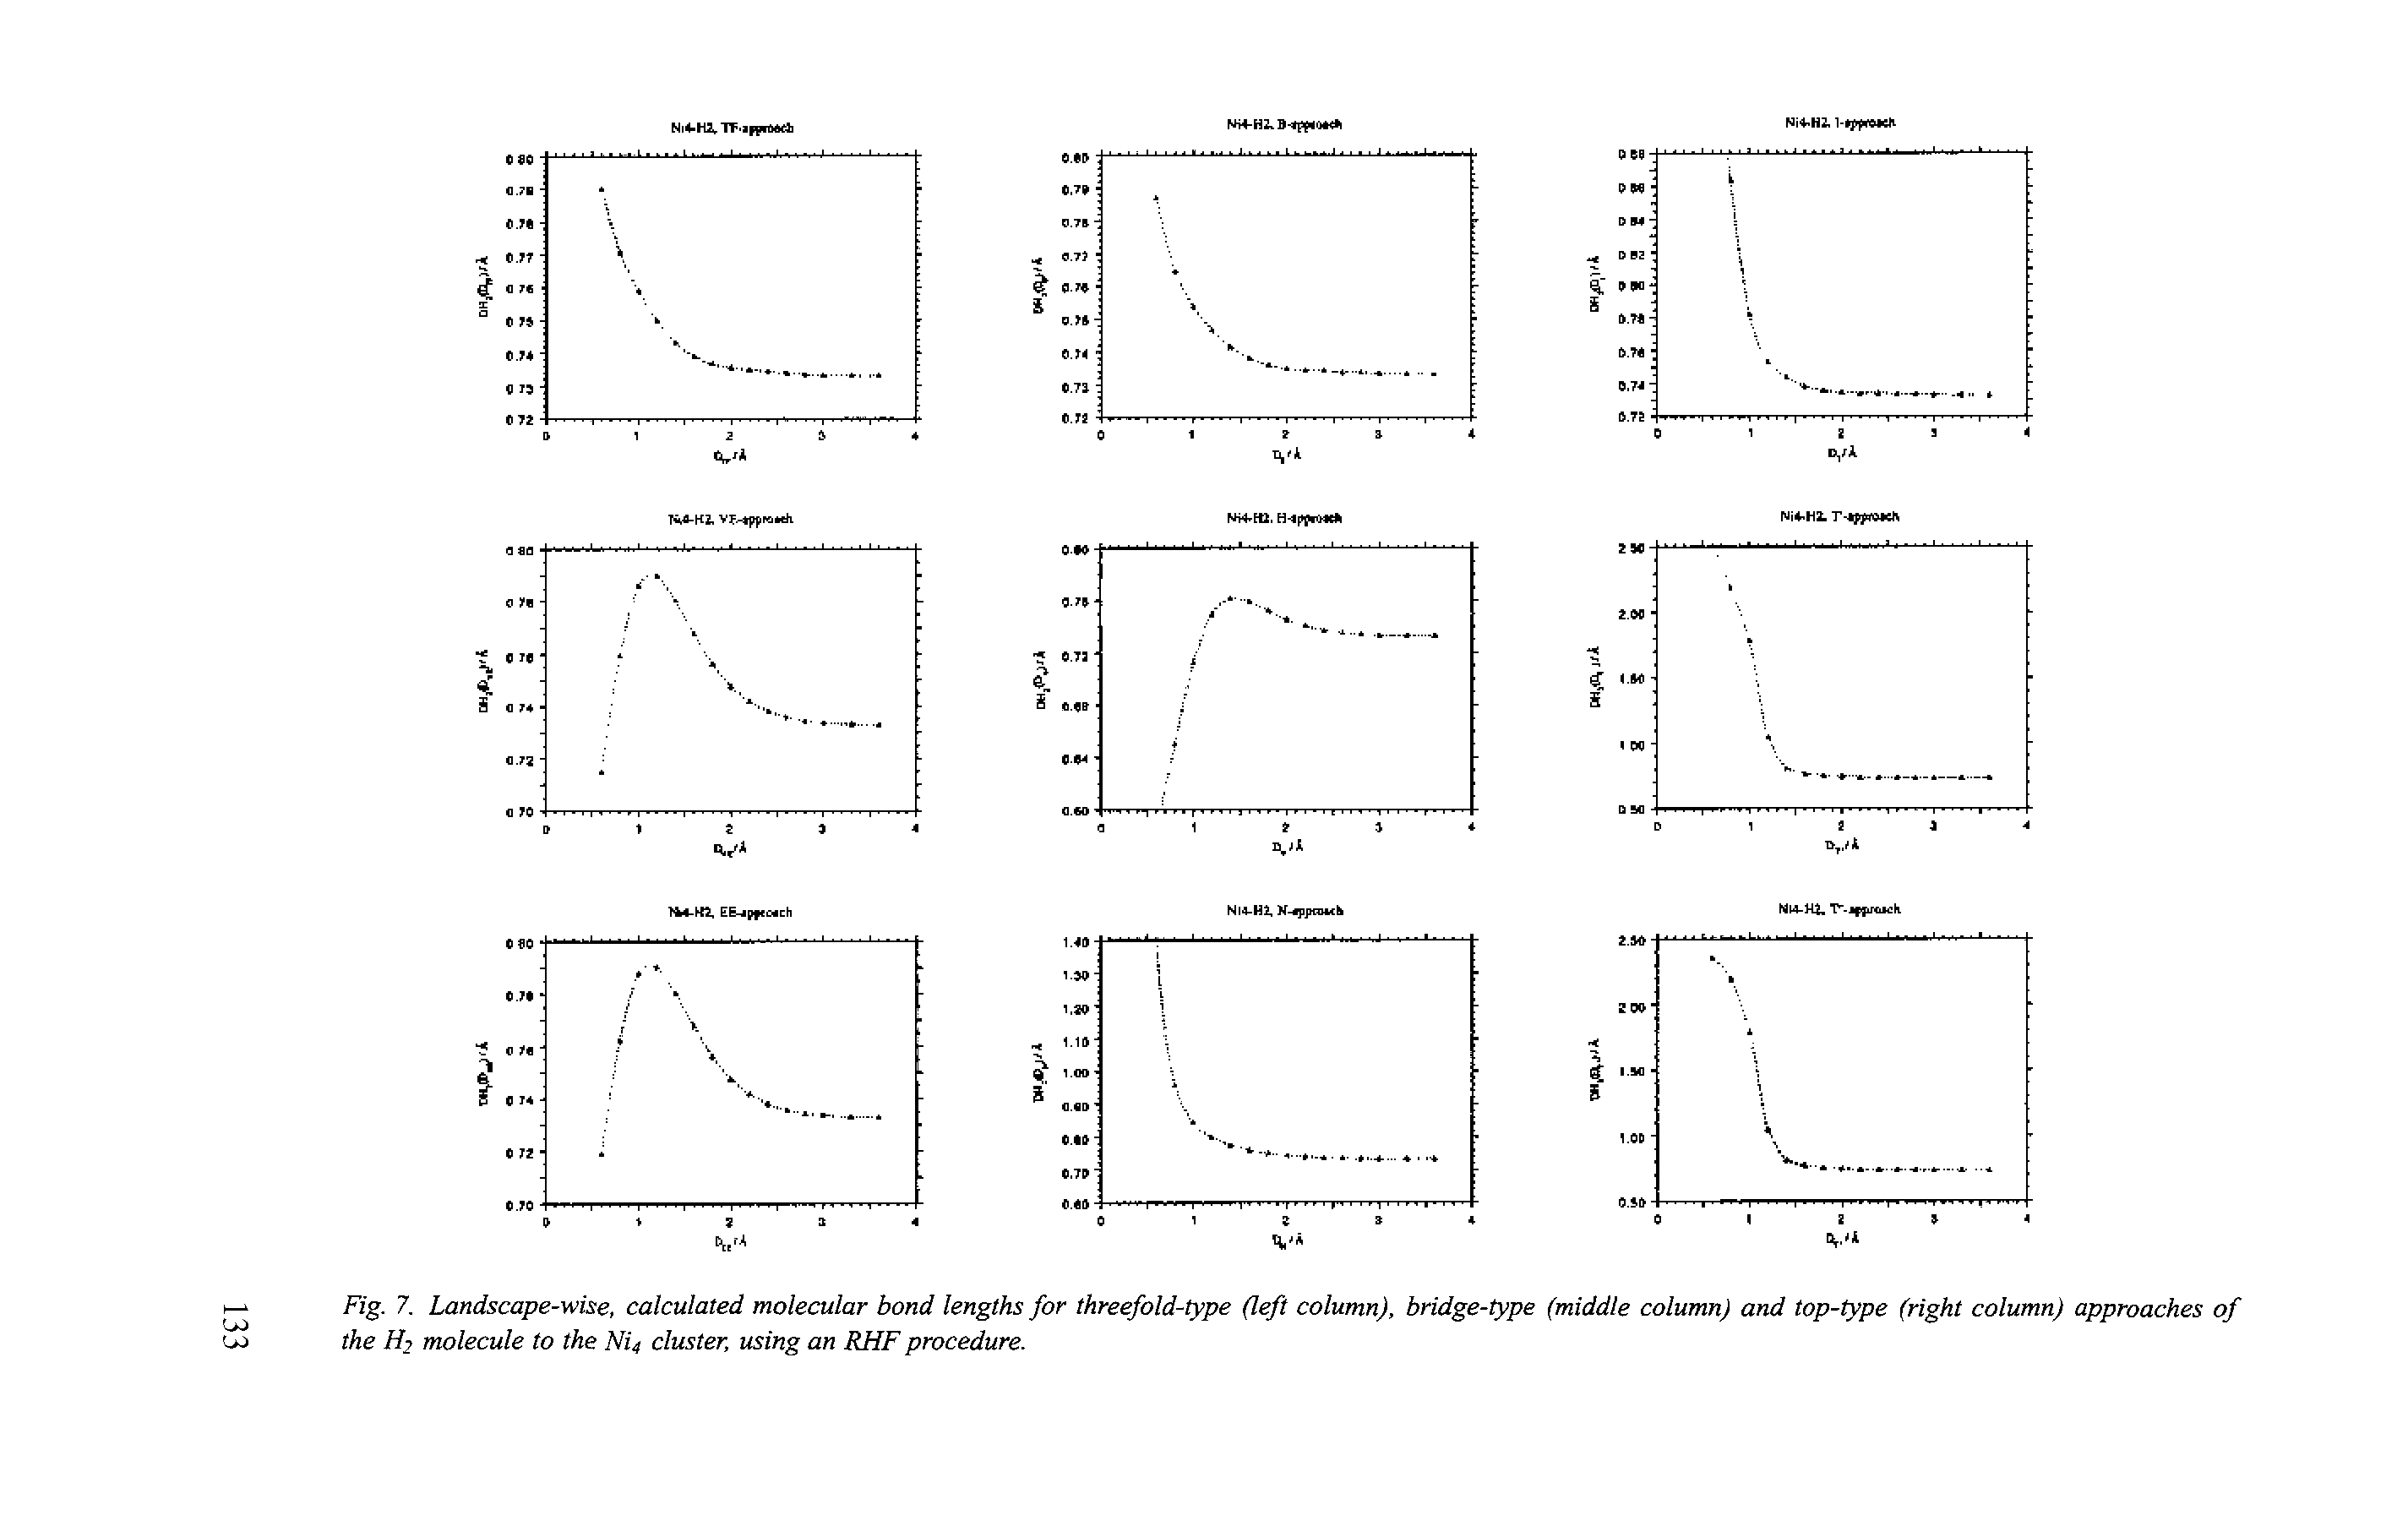 Fig. 7. Landscape-wise, calculated molecular bond lengths for threefold-type (left column), bridge-type (middle column) and top-type (right column) approaches of...